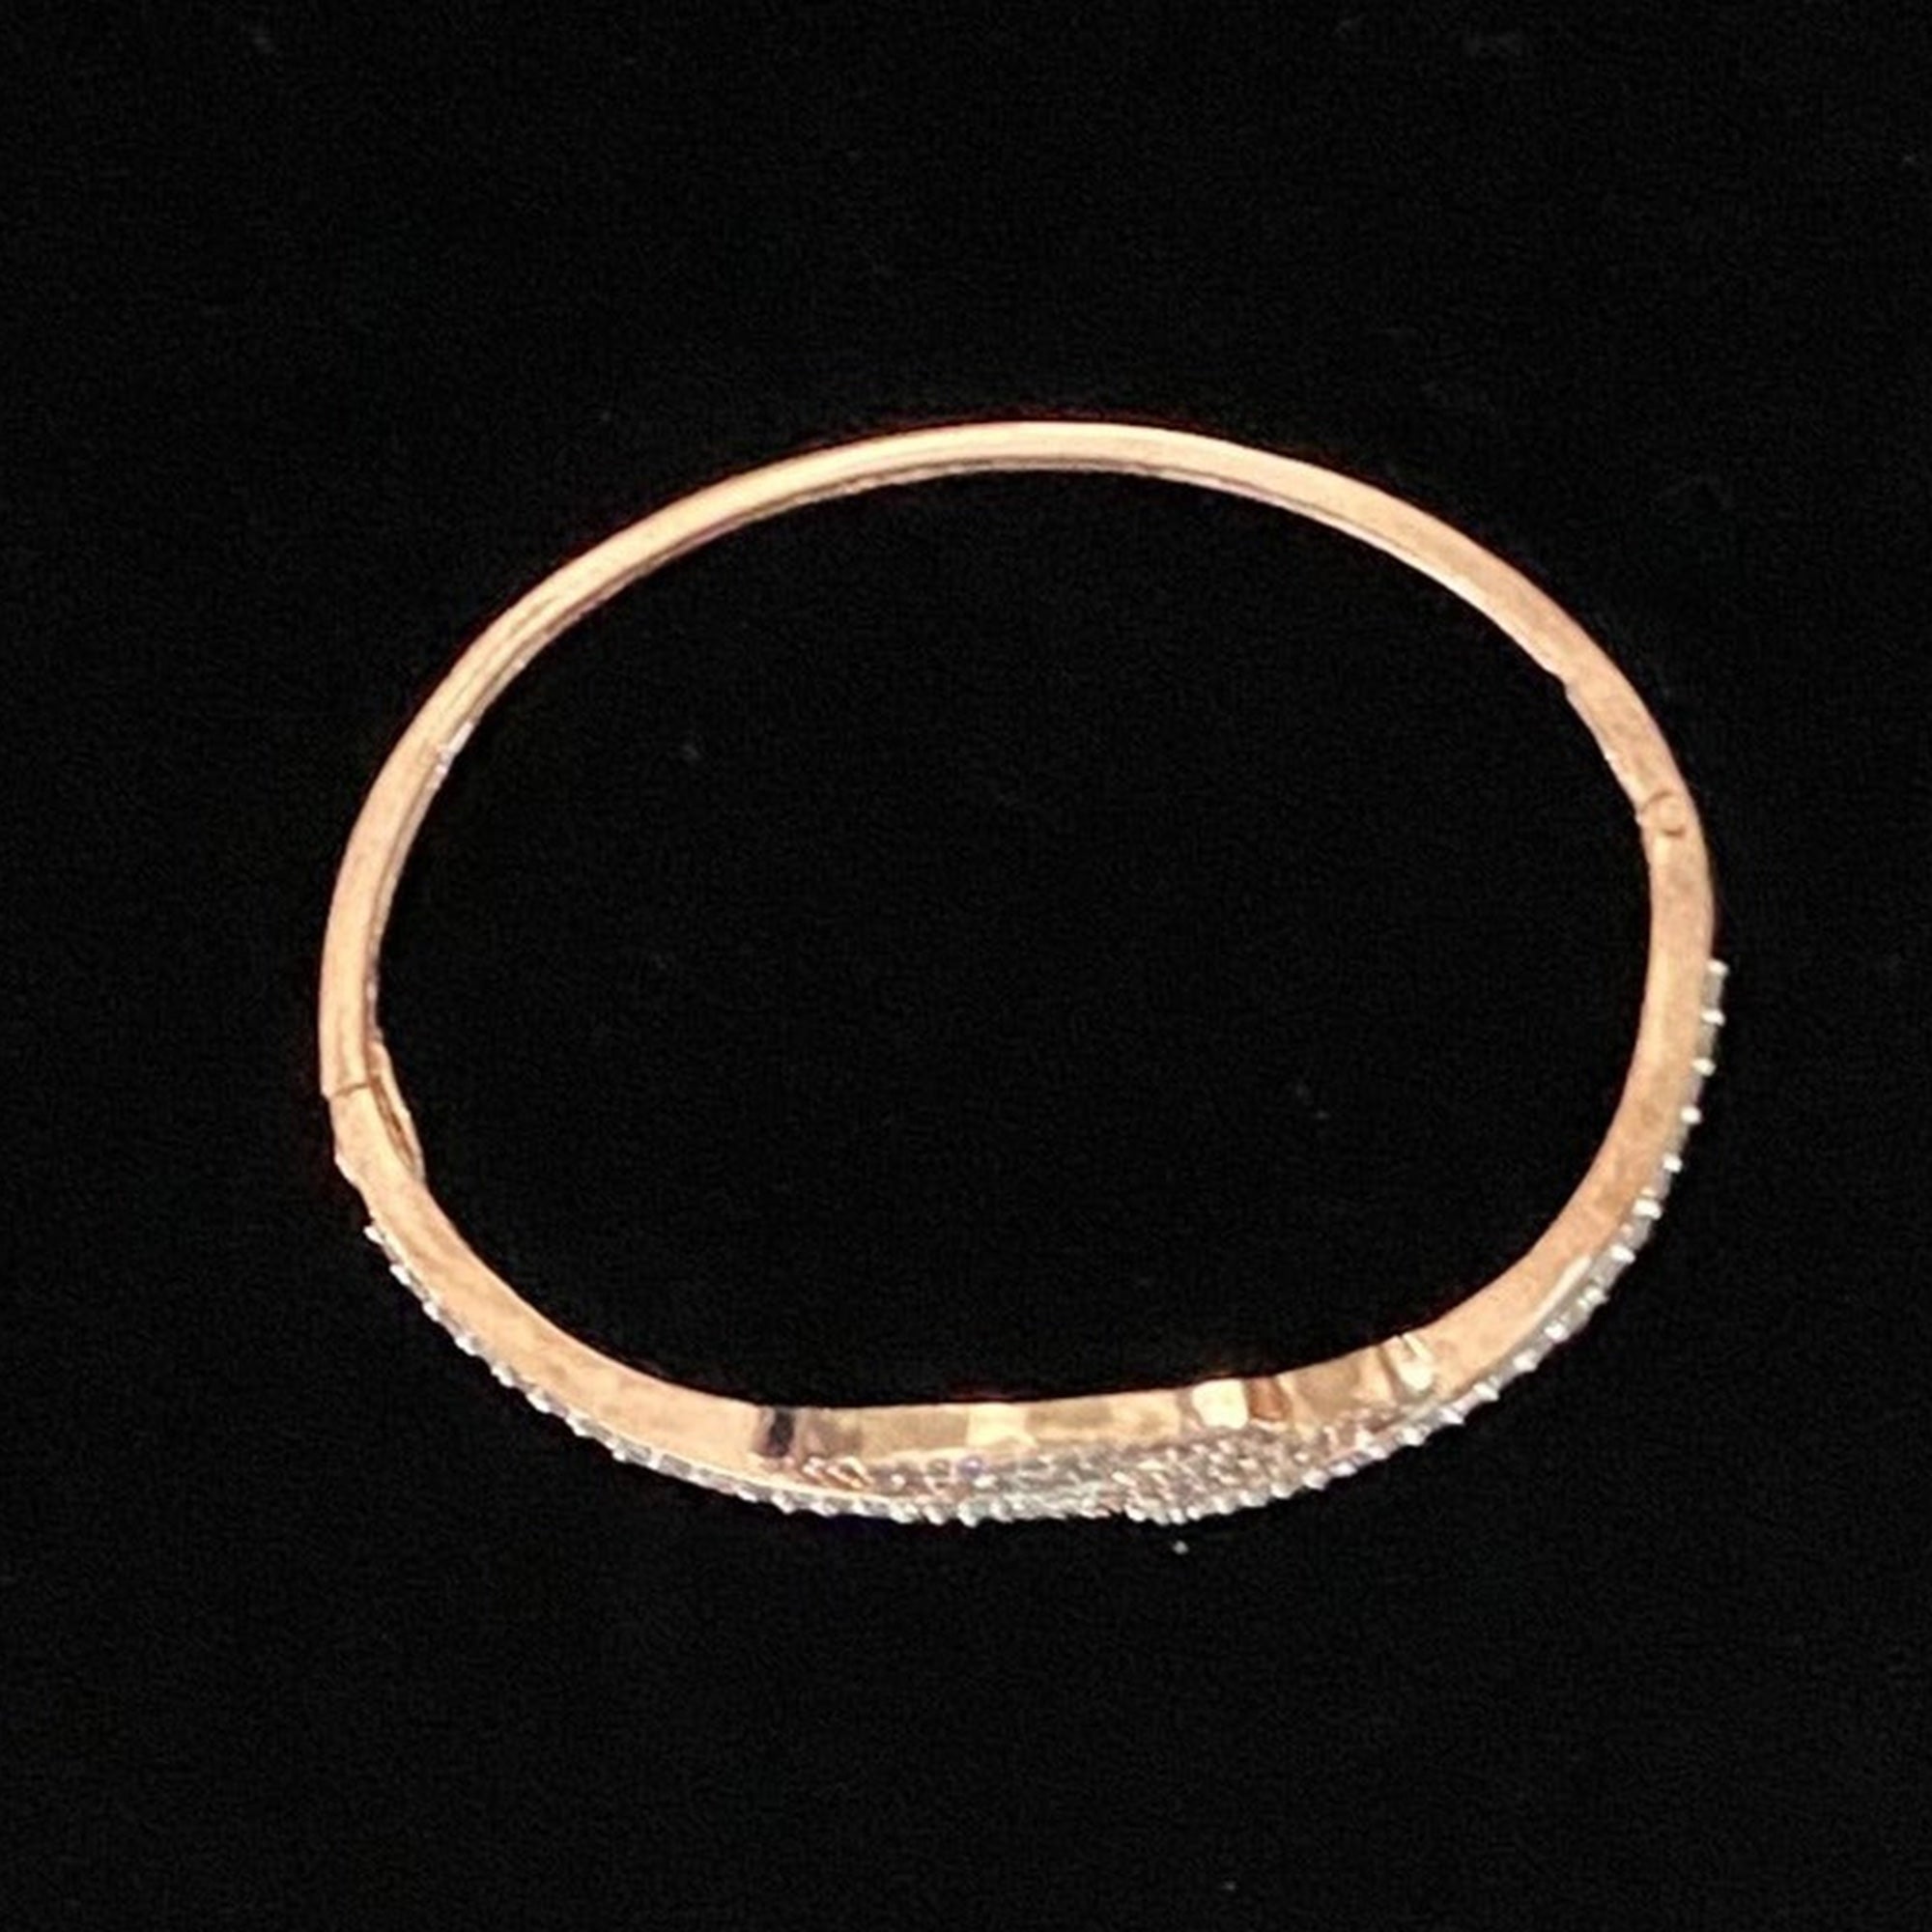 Rose Gold Plated Clear CZ Cubic Zirconia Bangle Size 2.4 Evening Cocktail Imitation Jewelry Indian Wedding Bridal Necklace Set